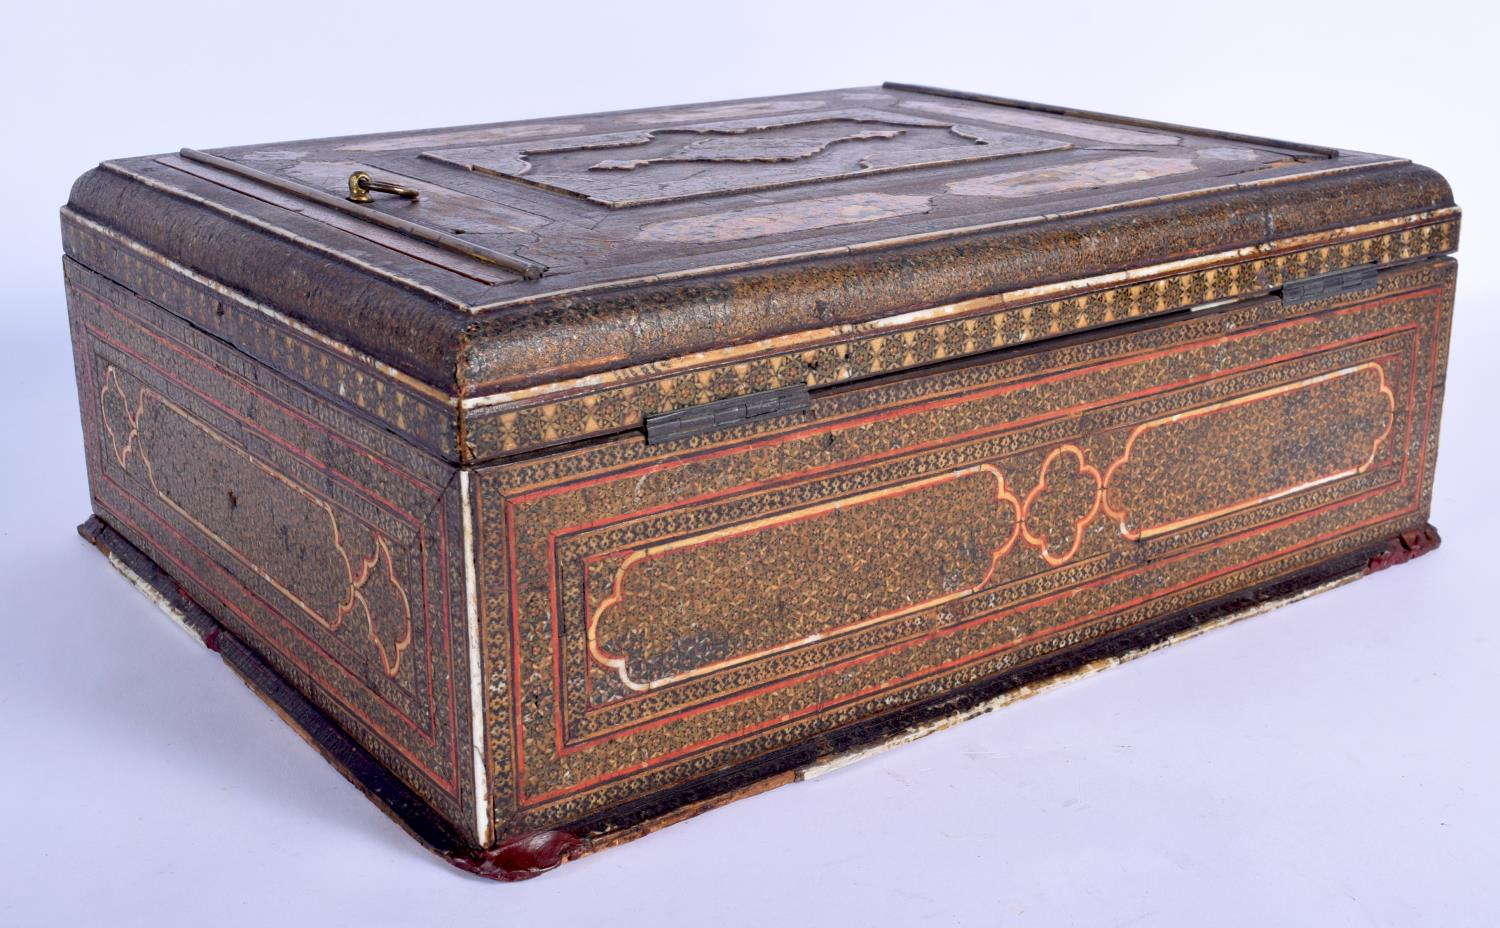 A RARE LARGE 18TH/19TH CENTURY MIDDLE EASTERN ISLAMIC MICRO MOSAIC BOX painted with Kufic script, fo - Image 2 of 8